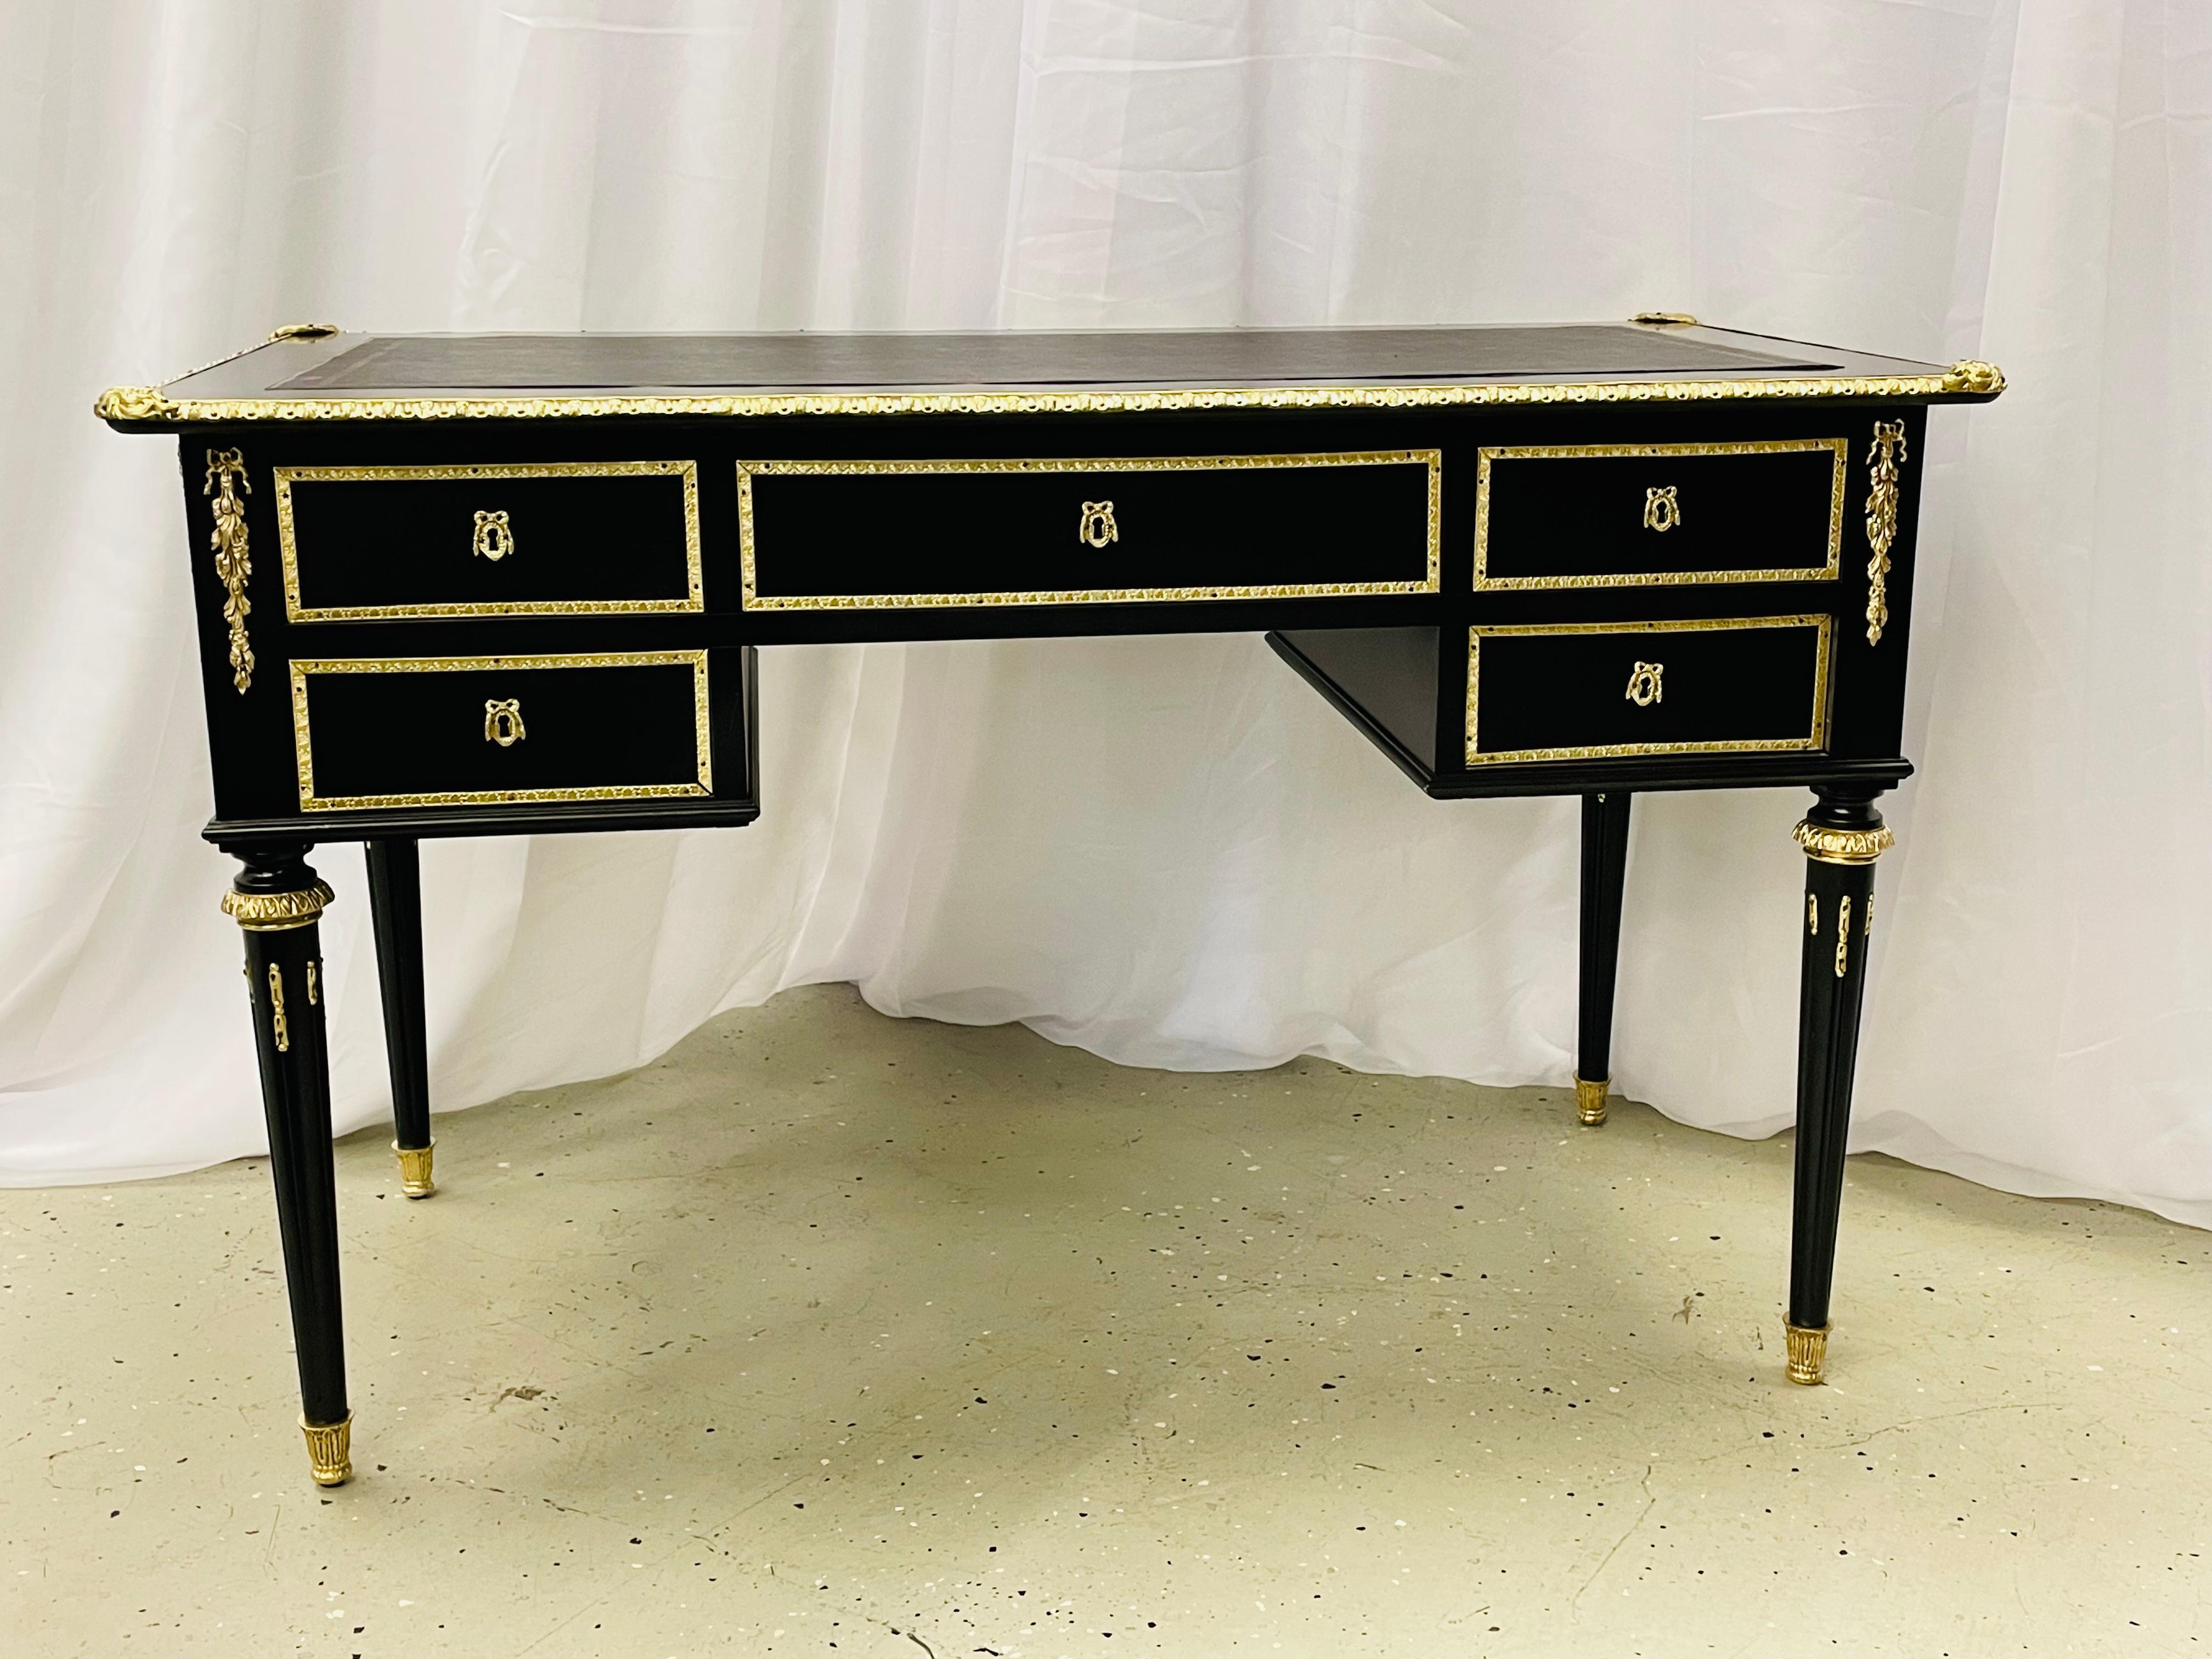 A Hollywood Regency ebony and bronze mounted desk, writing table or vanity

A stunning example of this highly sought after designers work. Bronze sabots and capitals shine on the sleek tapering legs with flame bronze mounts on the reeded centers